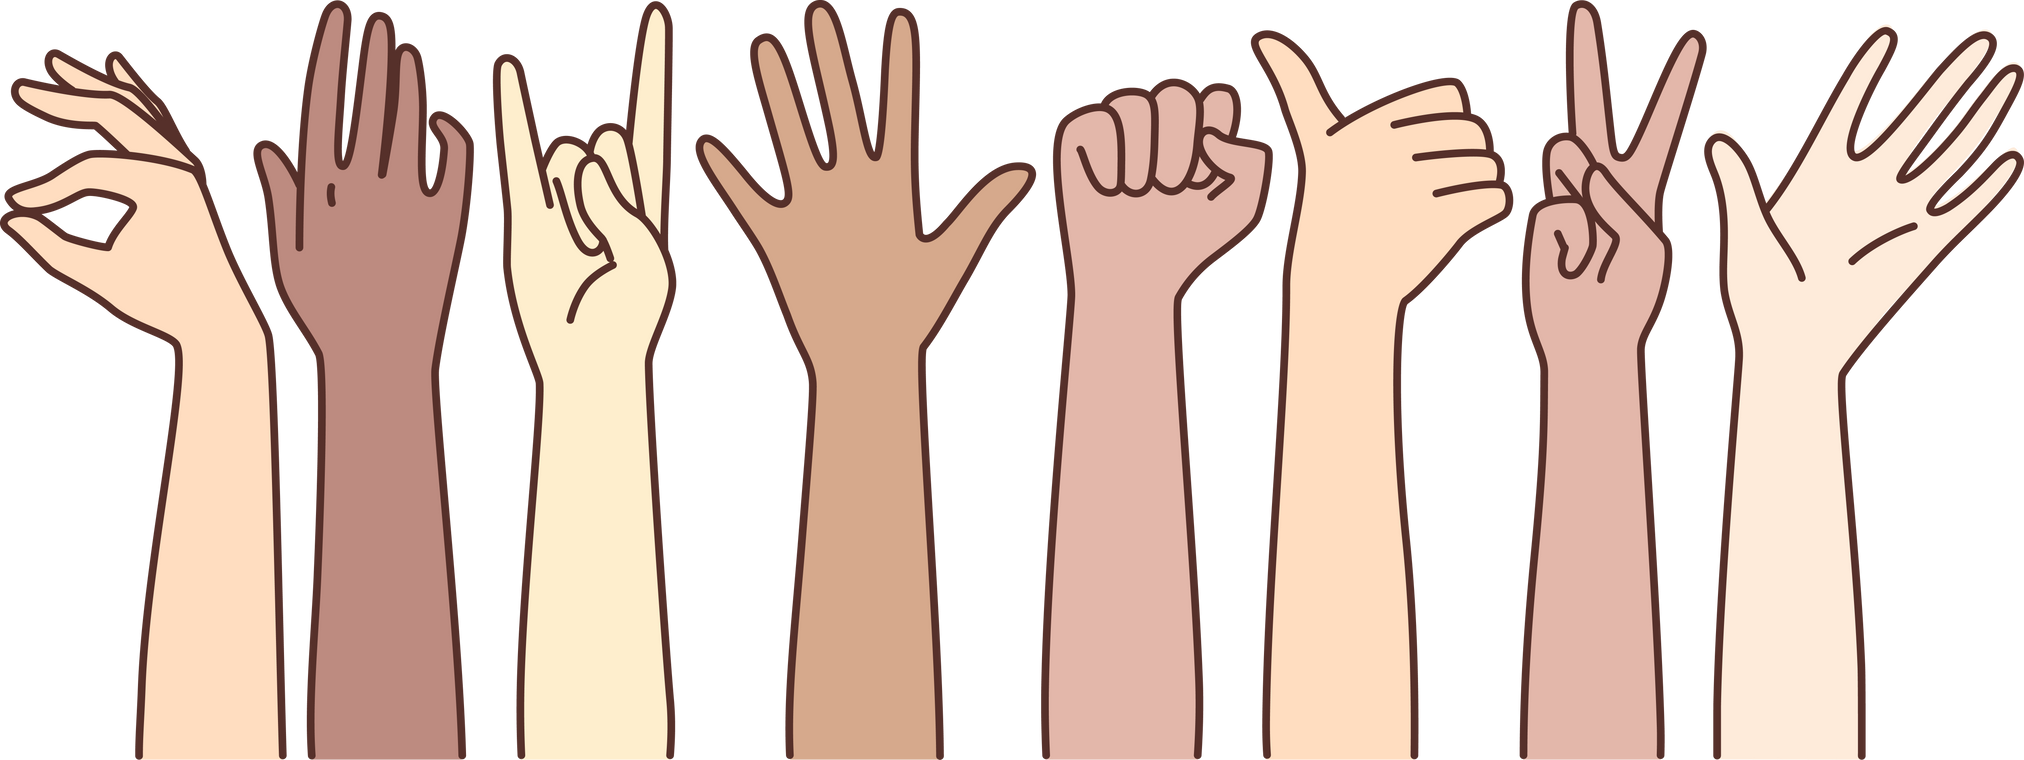 Diverse people show sign language signs